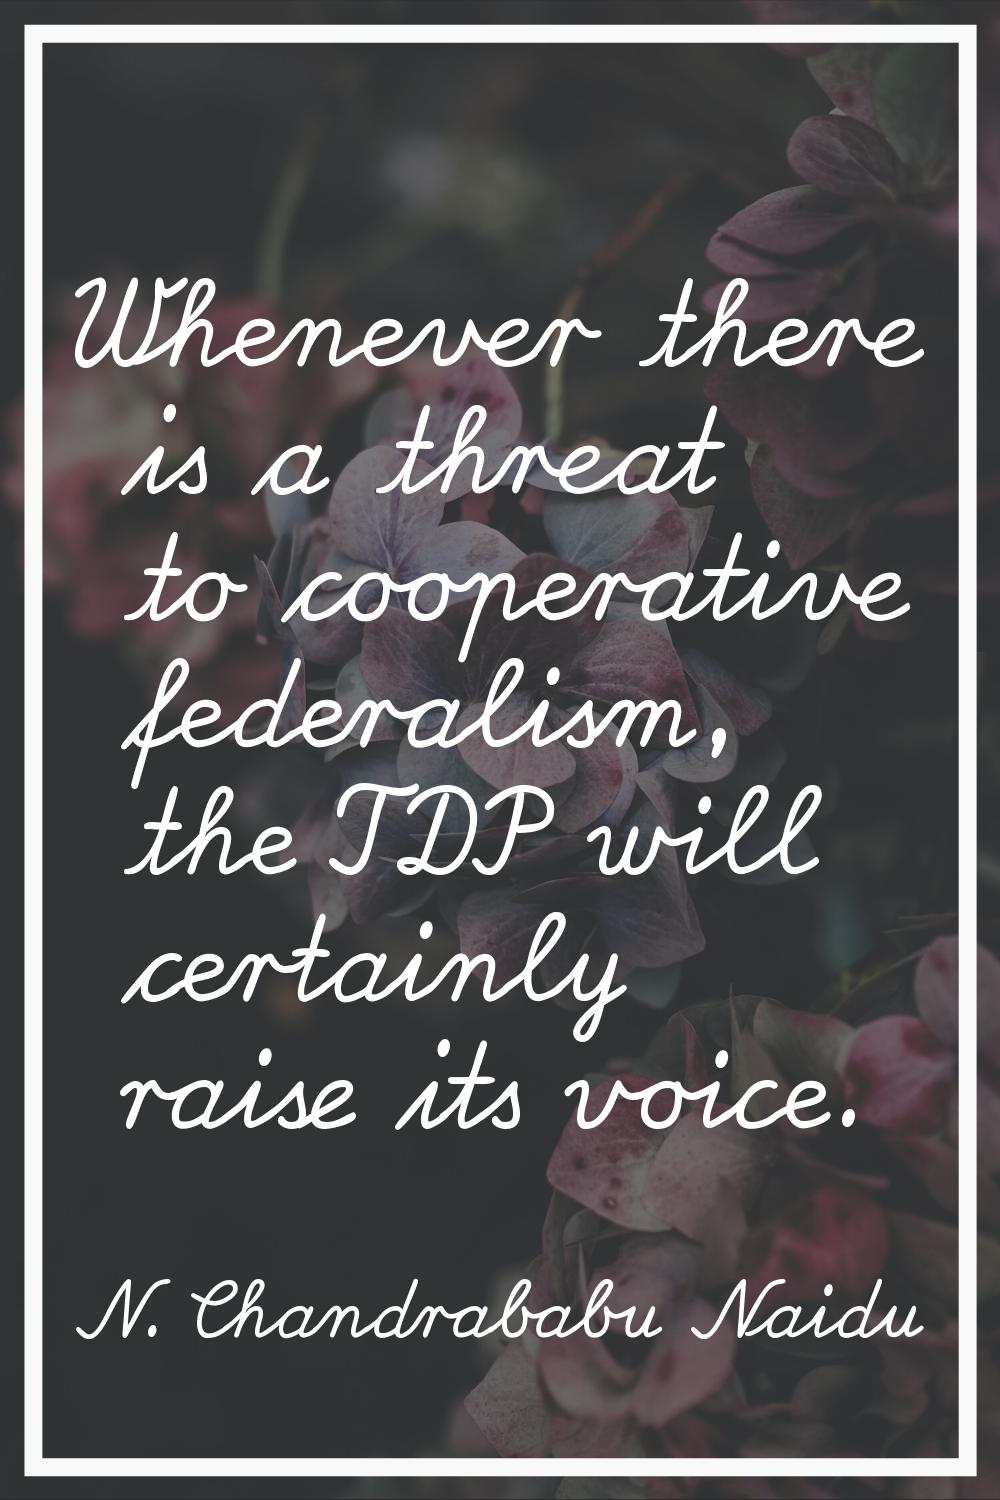 Whenever there is a threat to cooperative federalism, the TDP will certainly raise its voice.